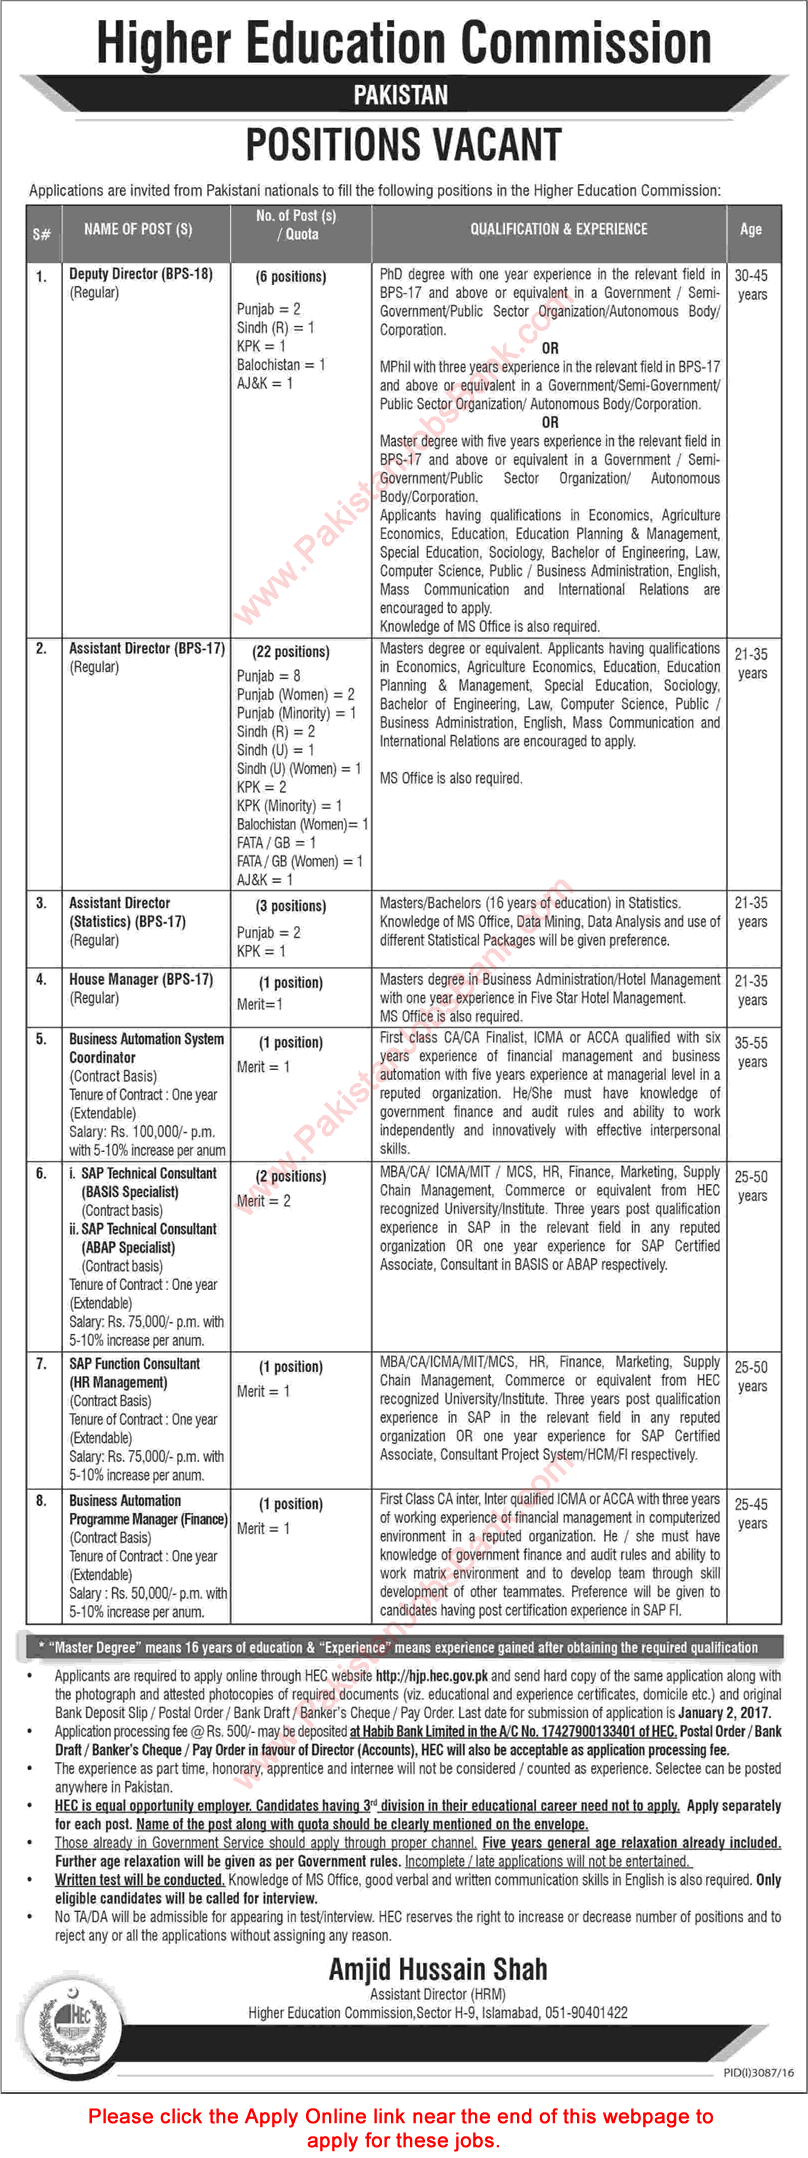 HEC Jobs December 2016 Apply Online Assistant Directors & Others Higher Education Commission Latest